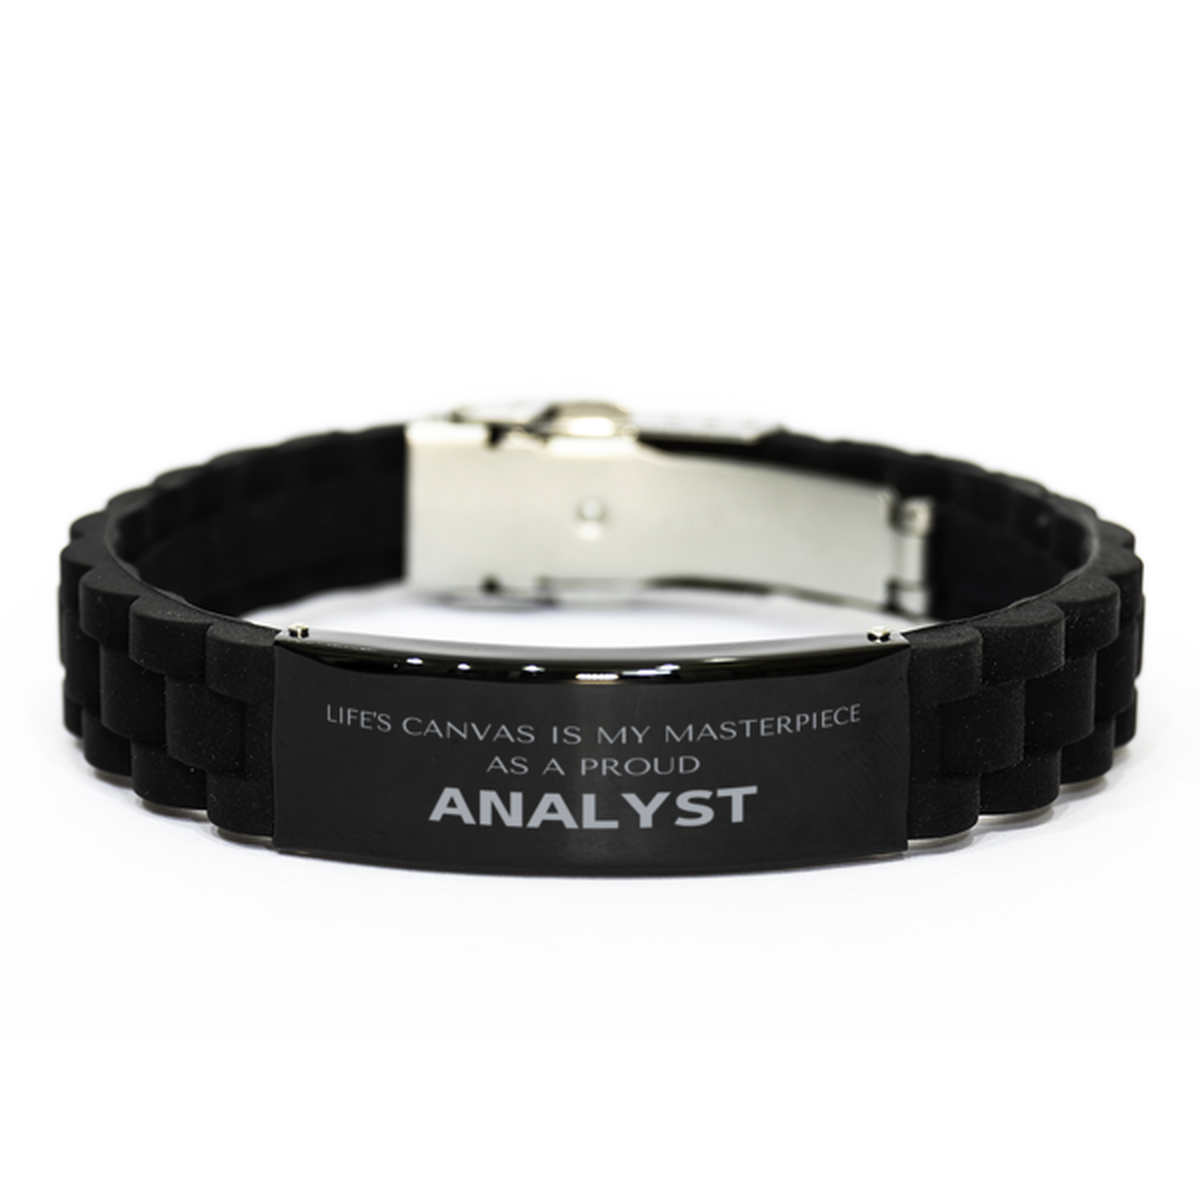 Proud Analyst Gifts, Life's canvas is my masterpiece, Epic Birthday Christmas Unique Black Glidelock Clasp Bracelet For Analyst, Coworkers, Men, Women, Friends